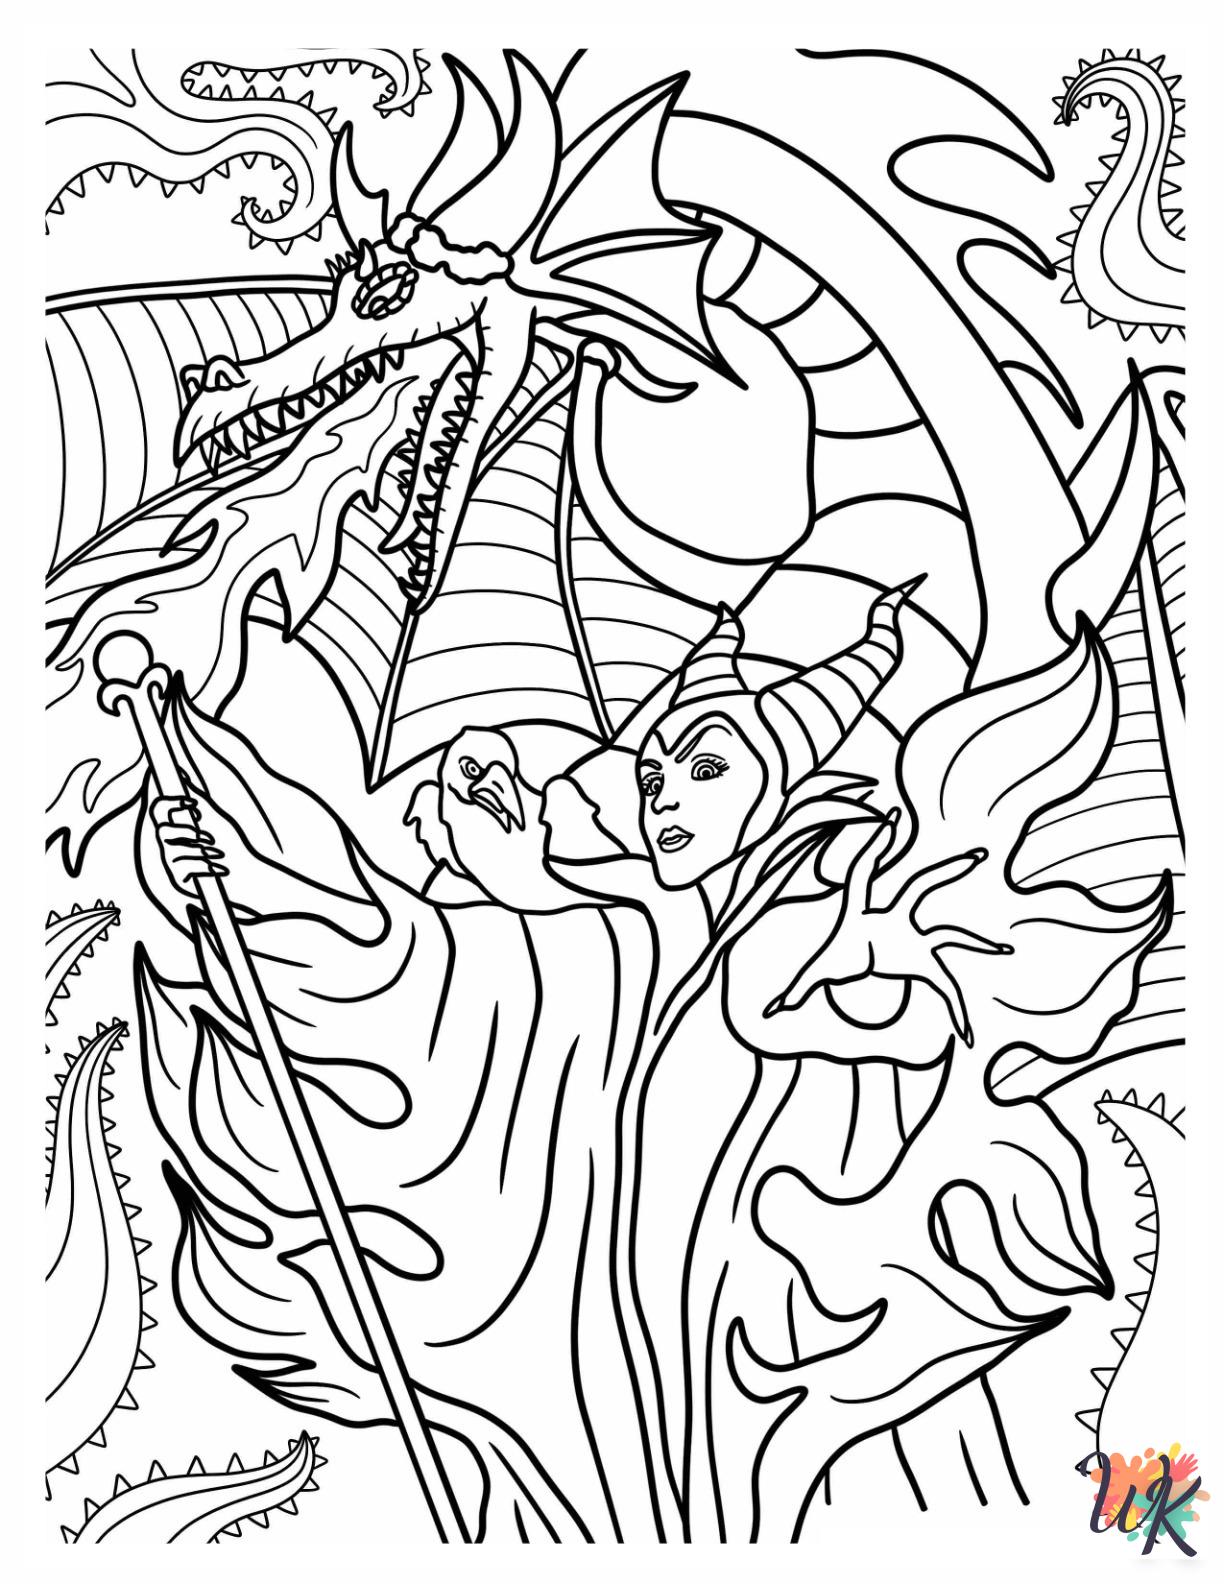 easy cute Maleficent coloring pages